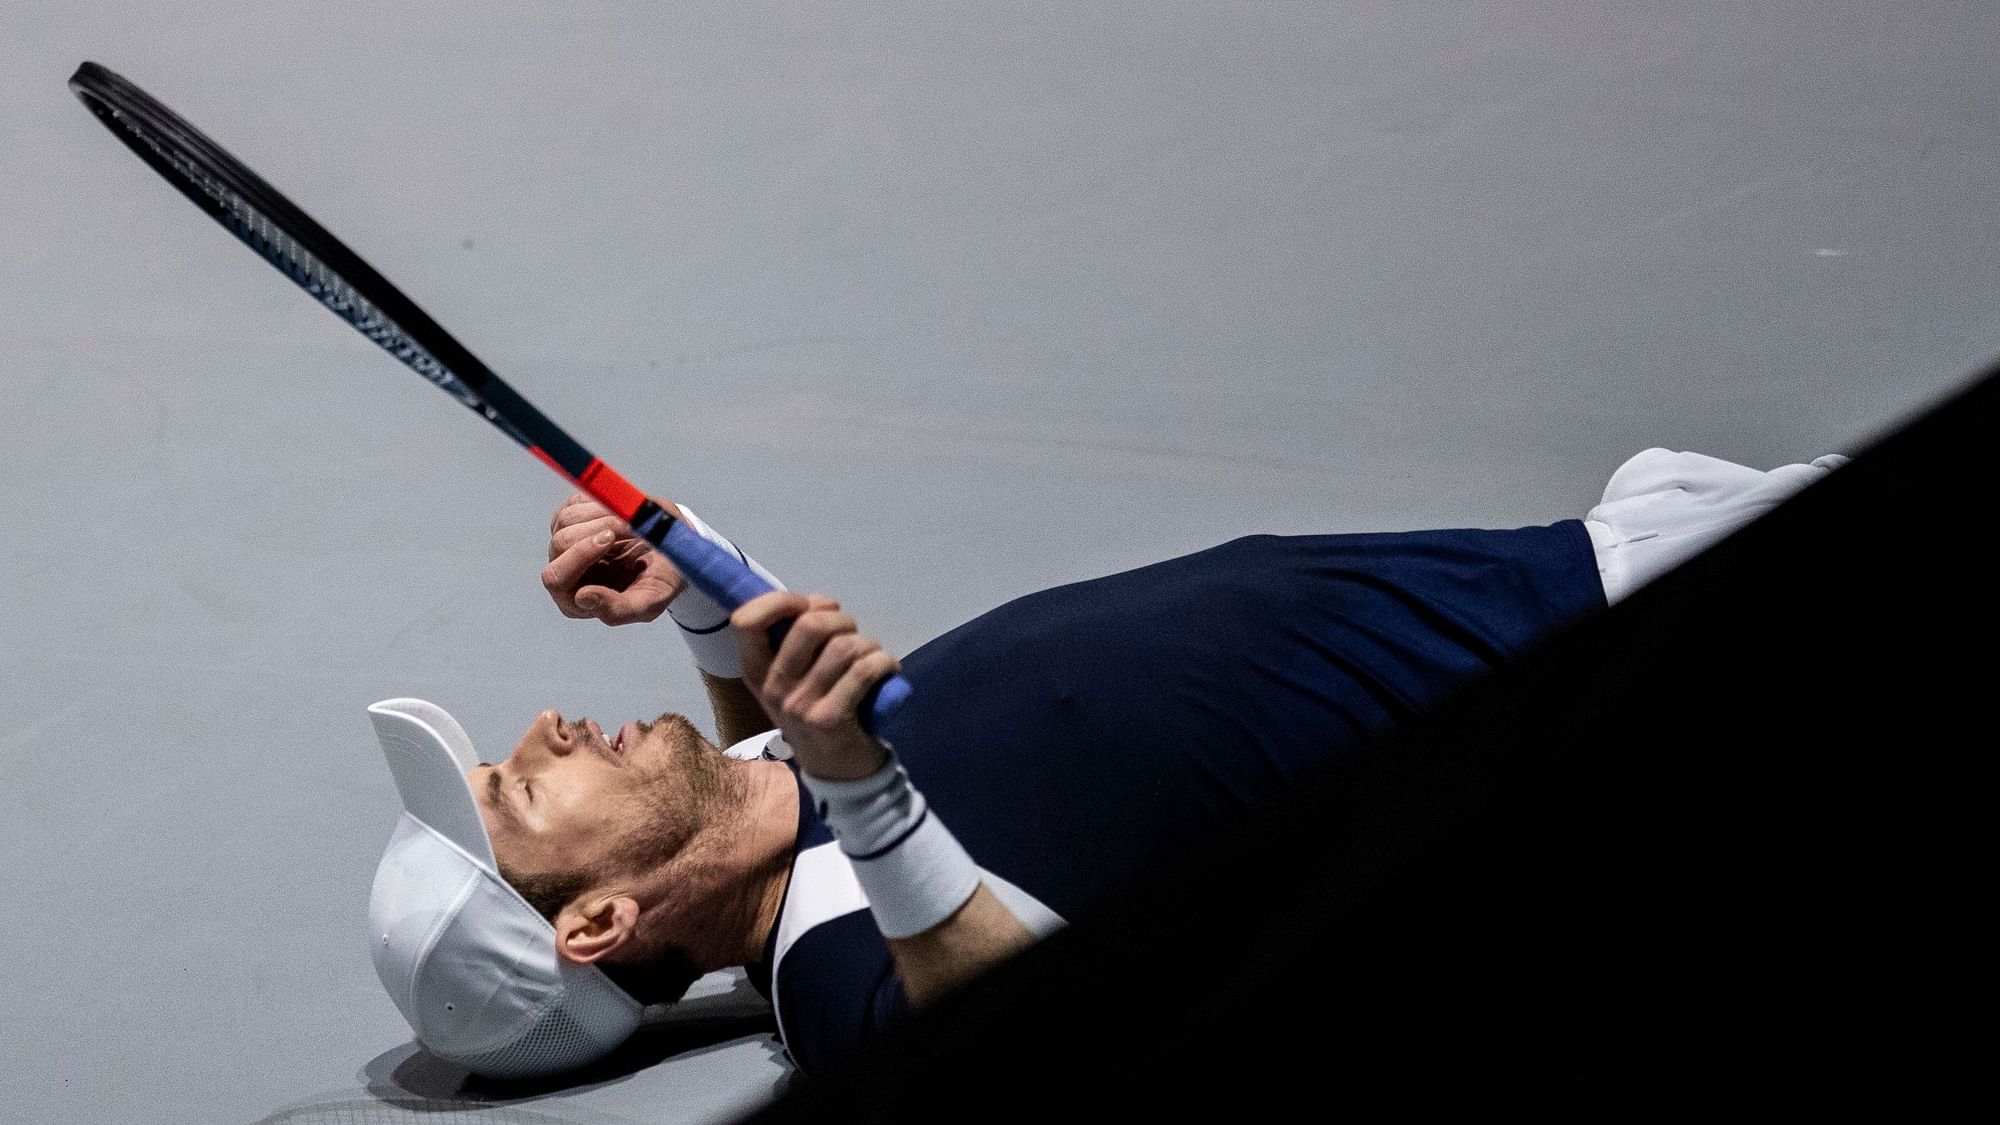 Great Britain’s Andy Murray falls down during the Davis Cup tennis match against Netherlands’ Tallon Griekspoor in Madrid, Spain.